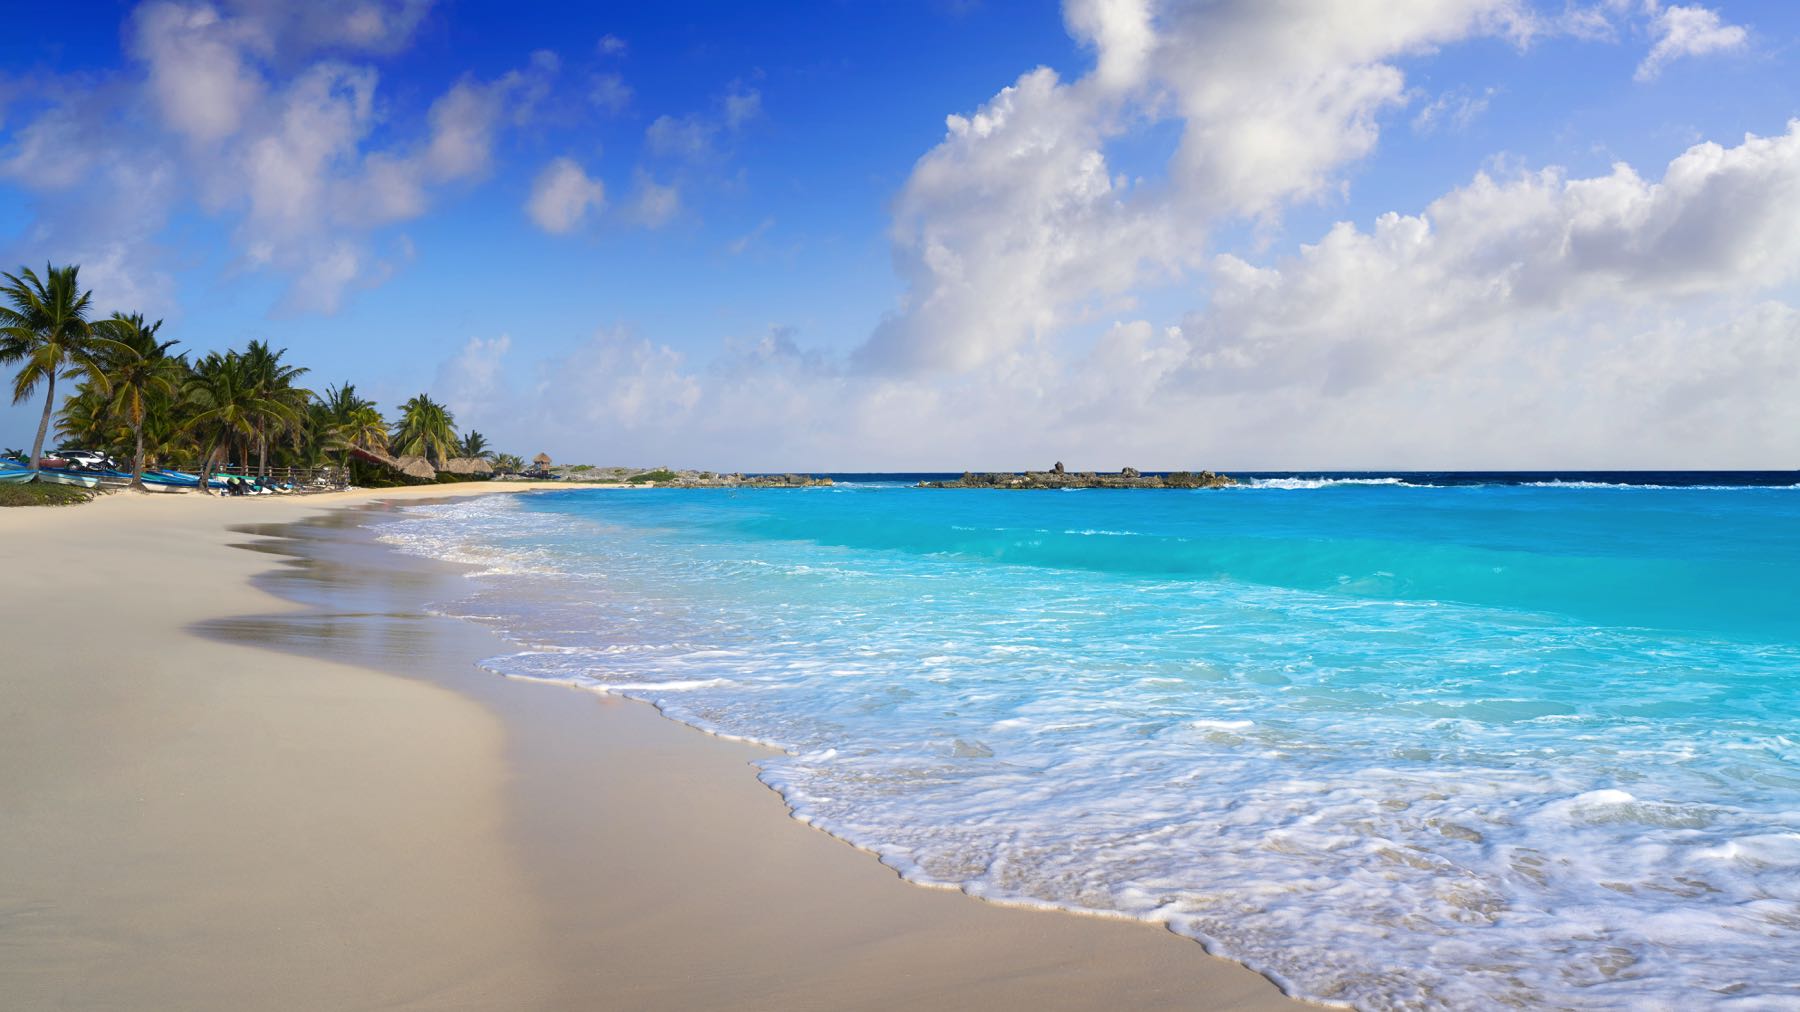 21 Things To Do in Cozumel: Mexico's Top Island